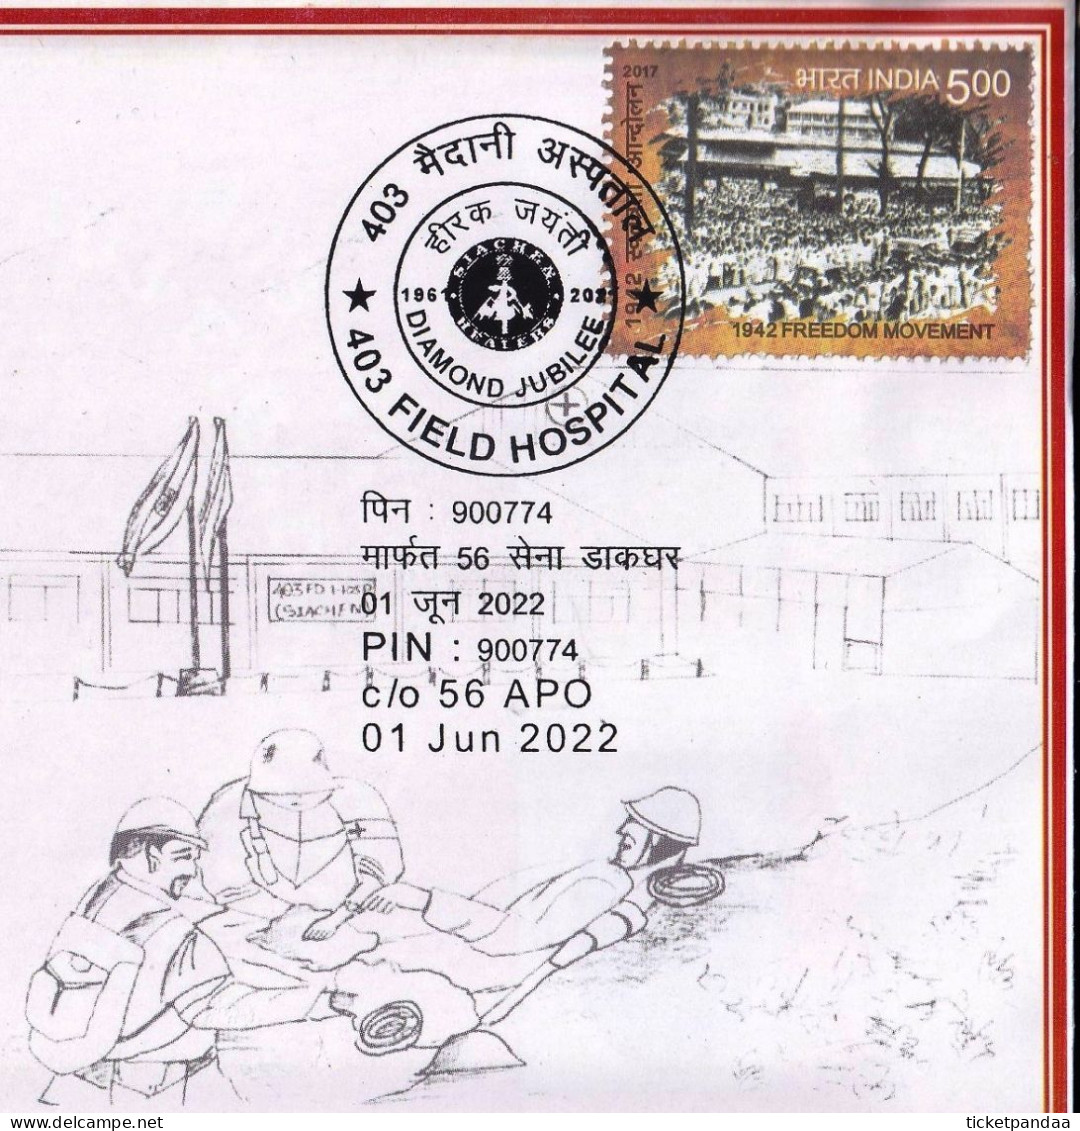 HEALTH- FIELD HOSPITALS AT SIACHEN GLACIER MOUNTAIN RANGE - PICTORIAL POSTMARK- SPECIAL COVER-INDIA-BX4-31 - EHBO